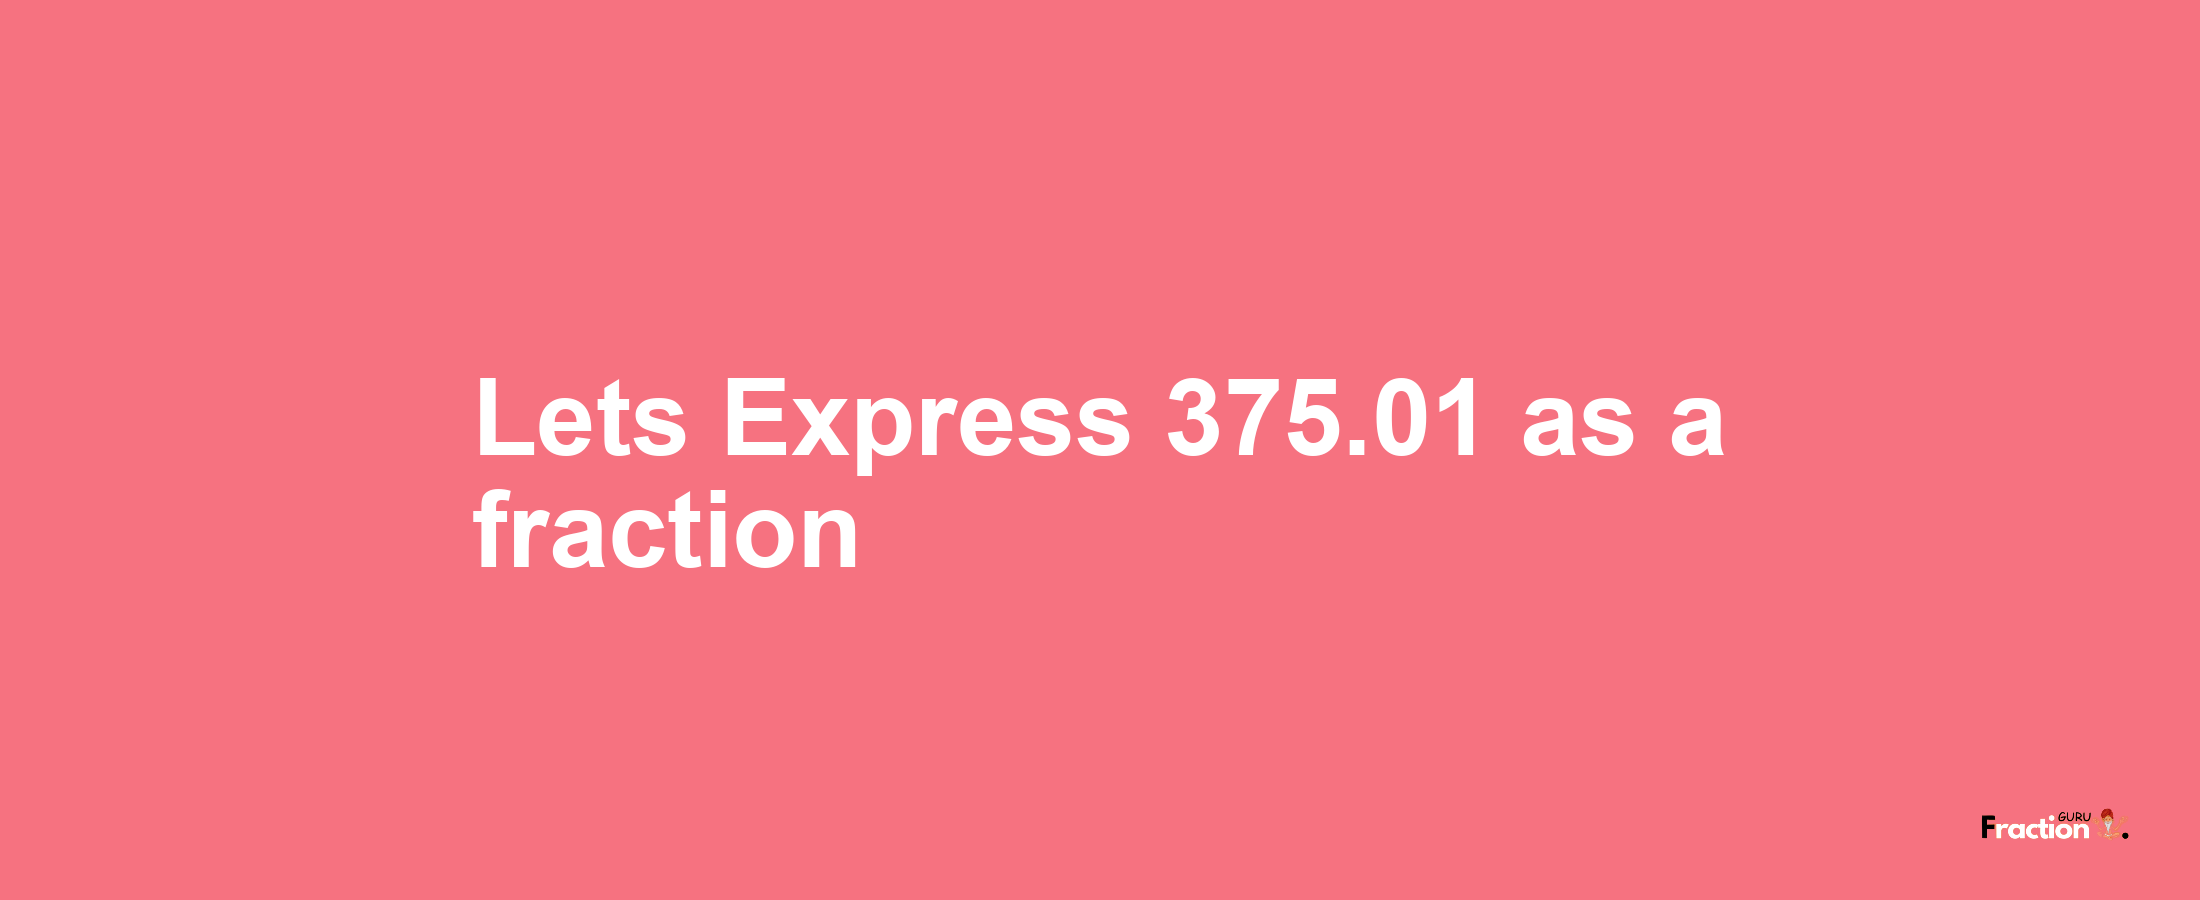 Lets Express 375.01 as afraction